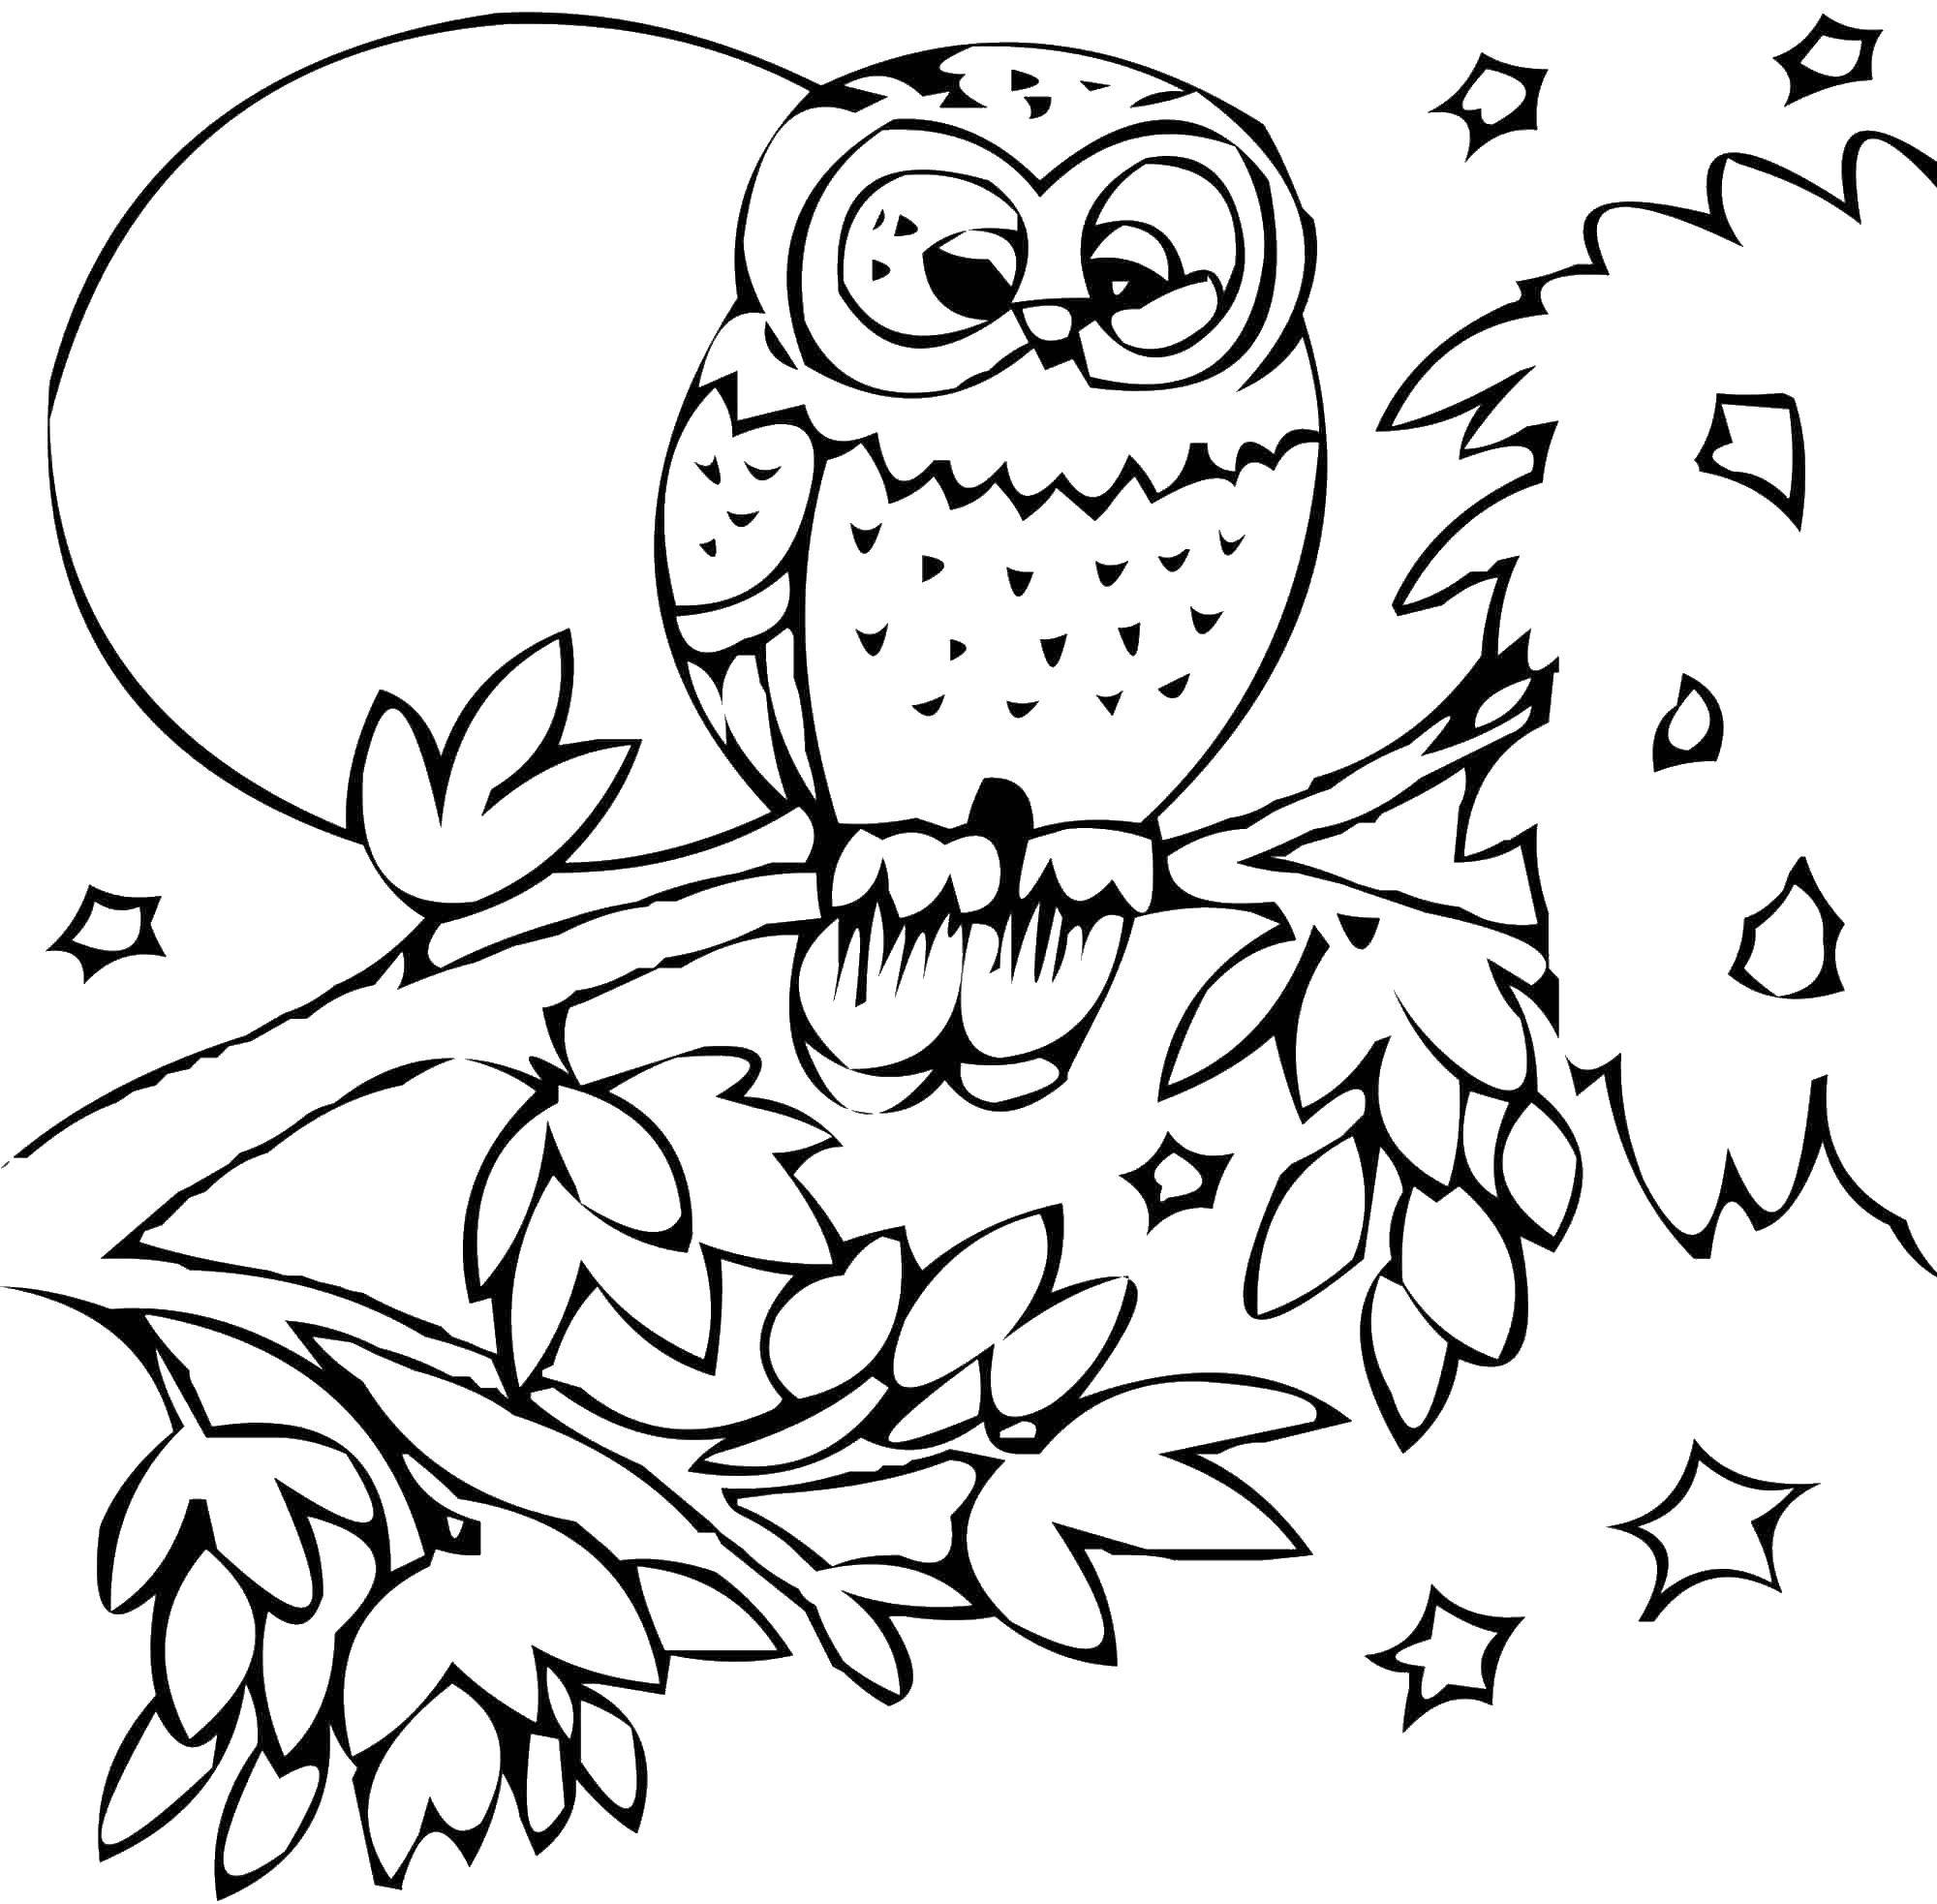 Coloring Night owl. Category coloring. Tags:  owls, birds, moon.